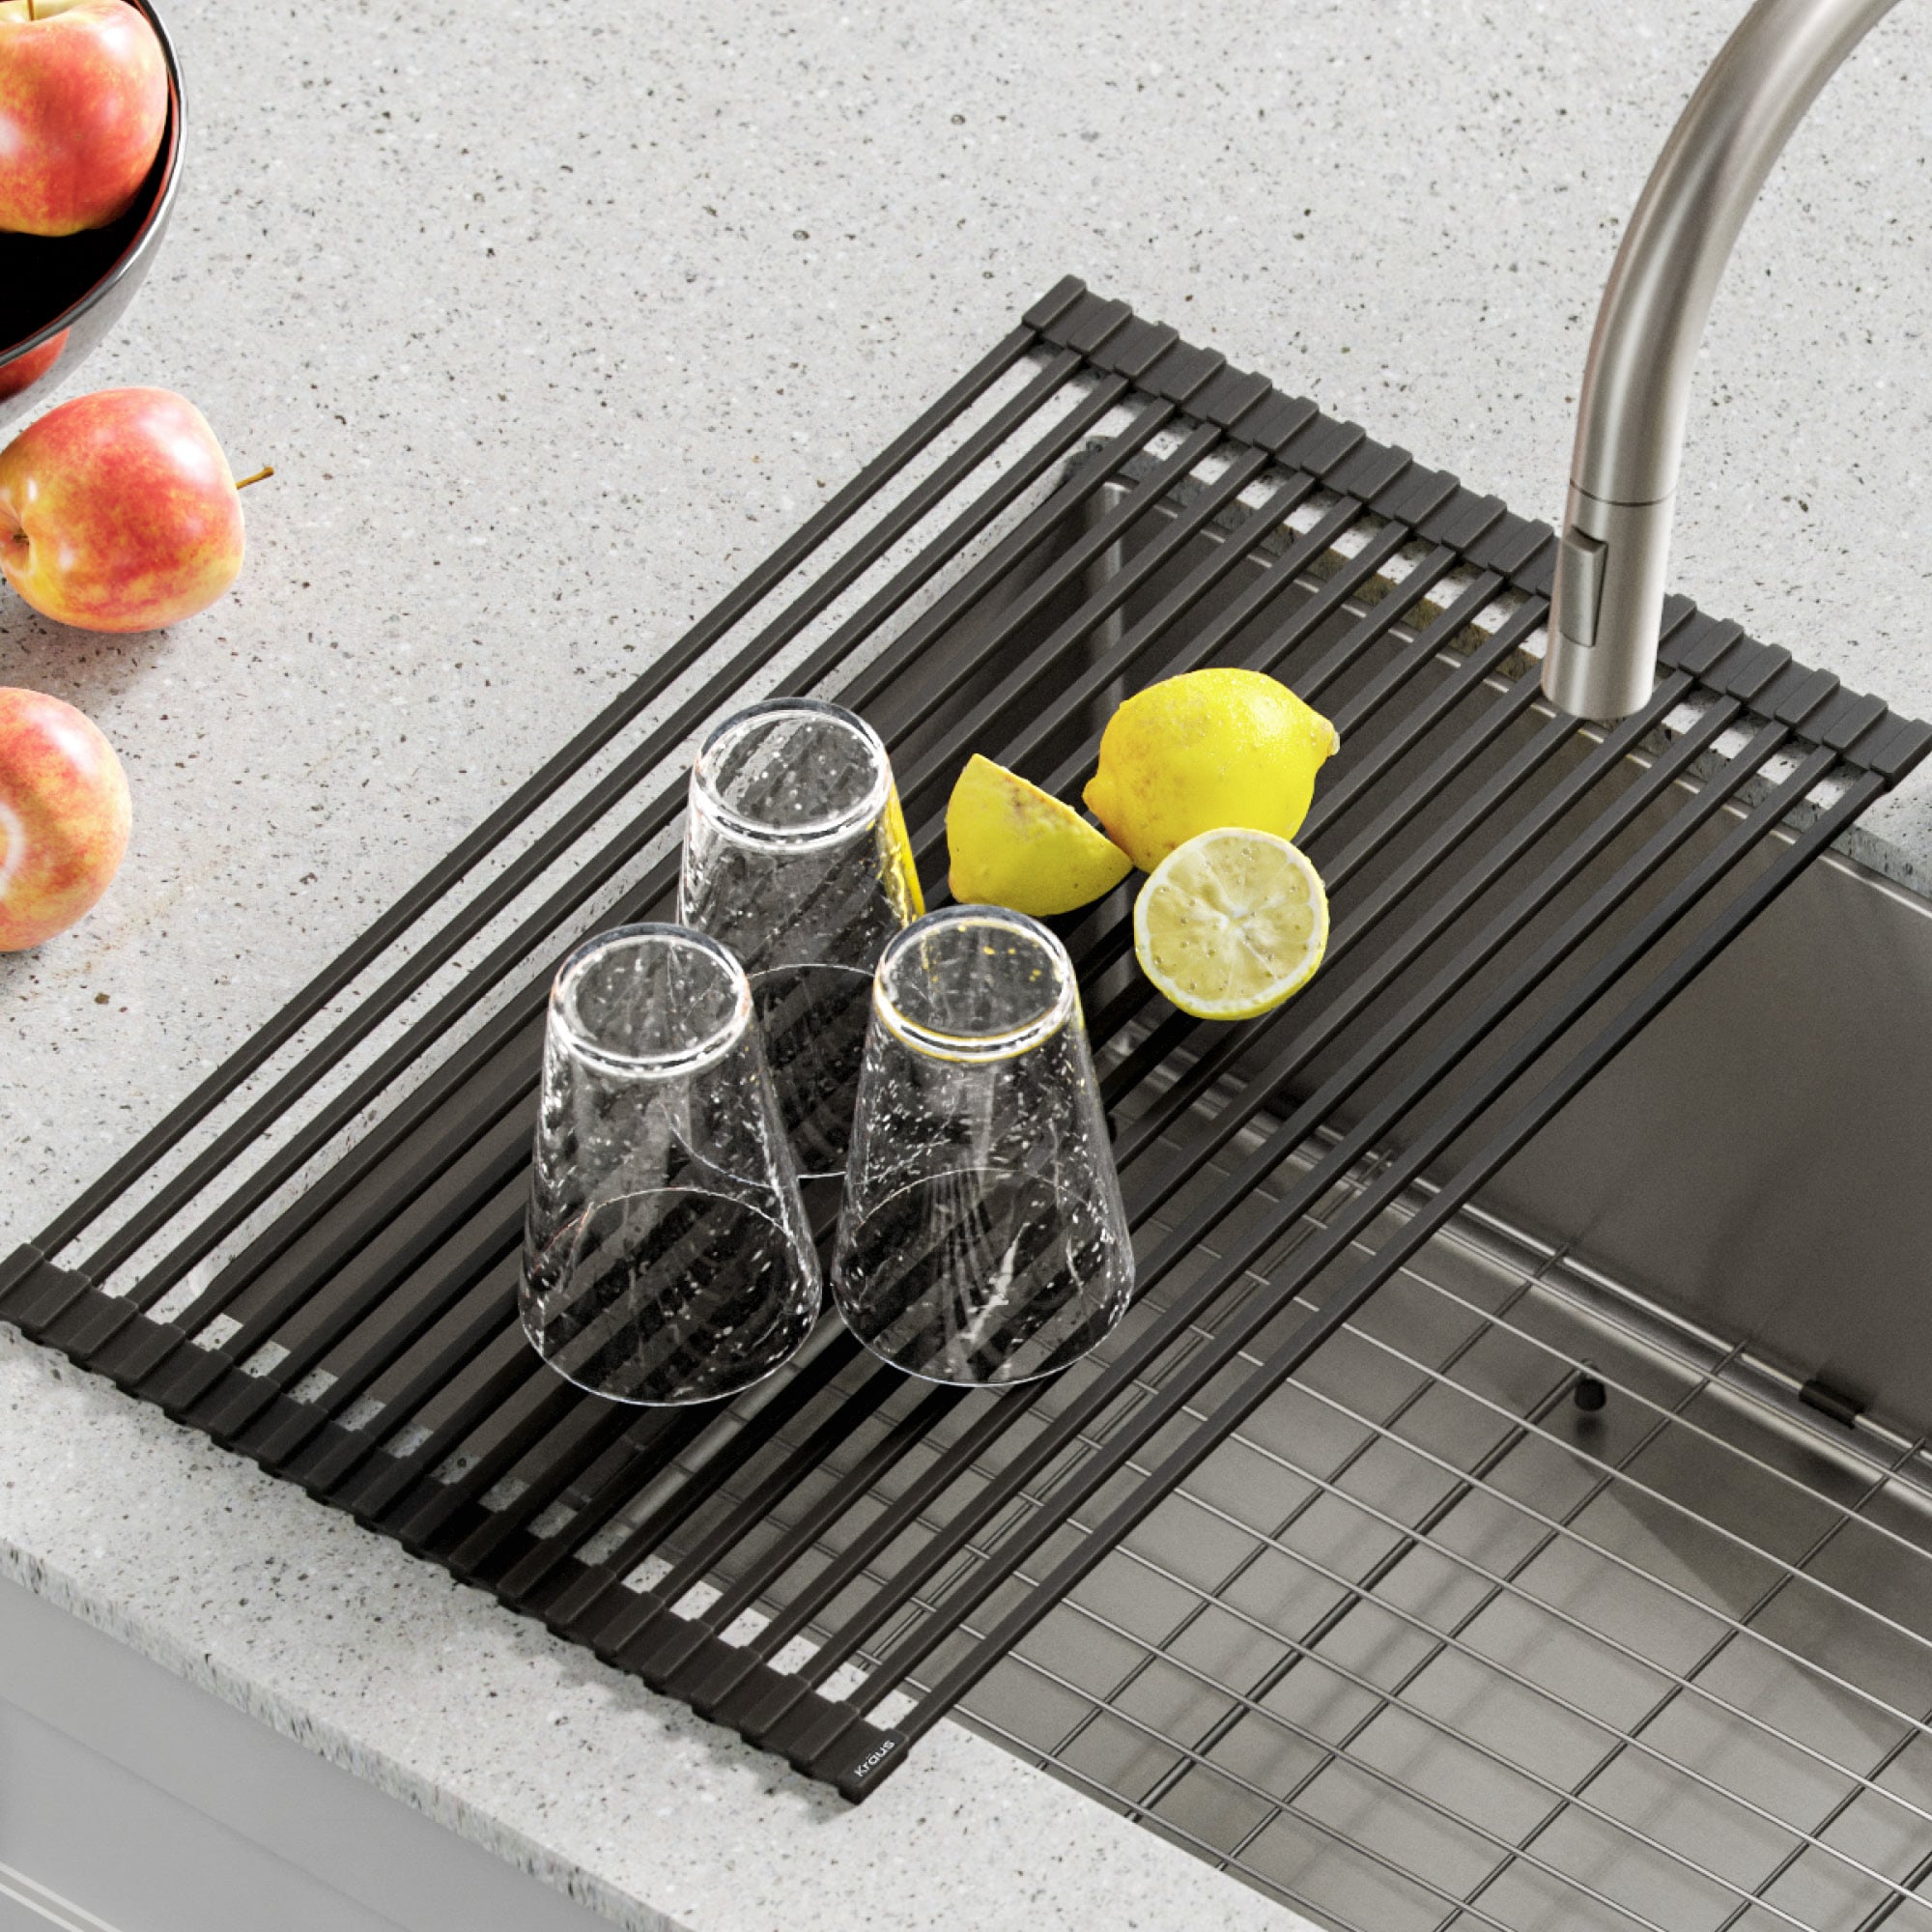 Kraus 12.75-in x 20.5-in Silicone Sink Mat in the Sink Grids & Mats  department at